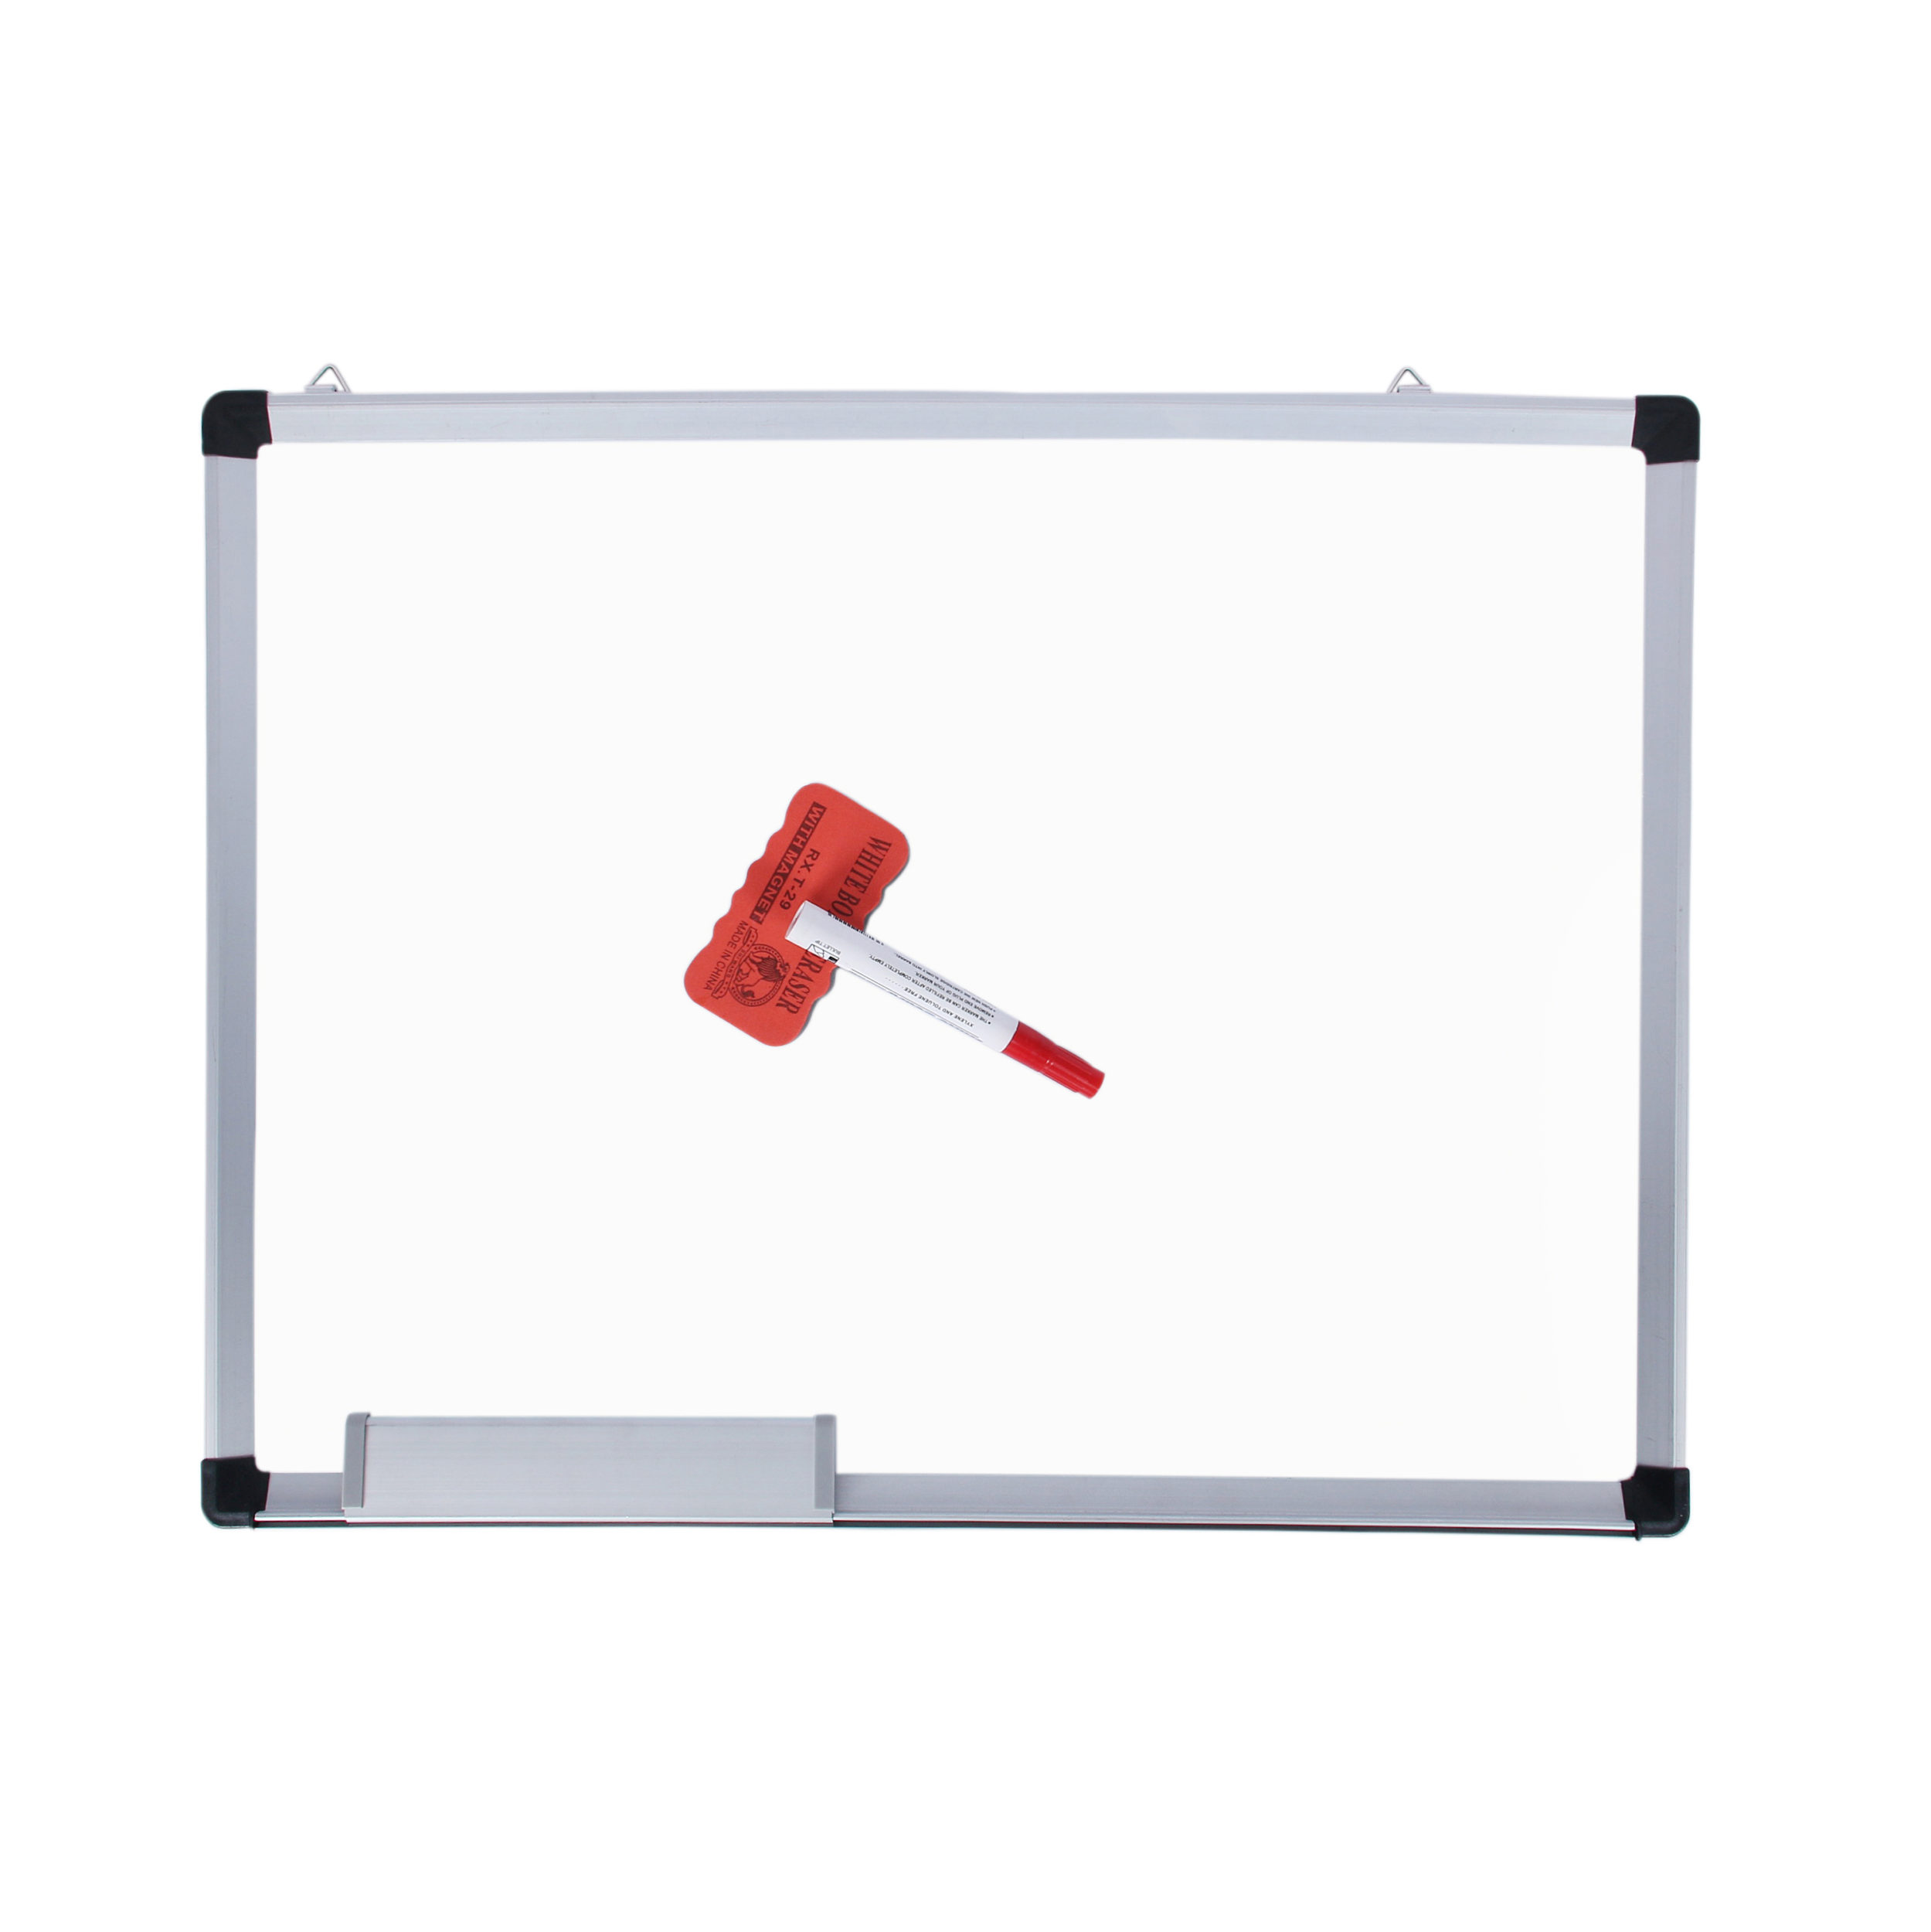 Magnetic Office Whiteboard